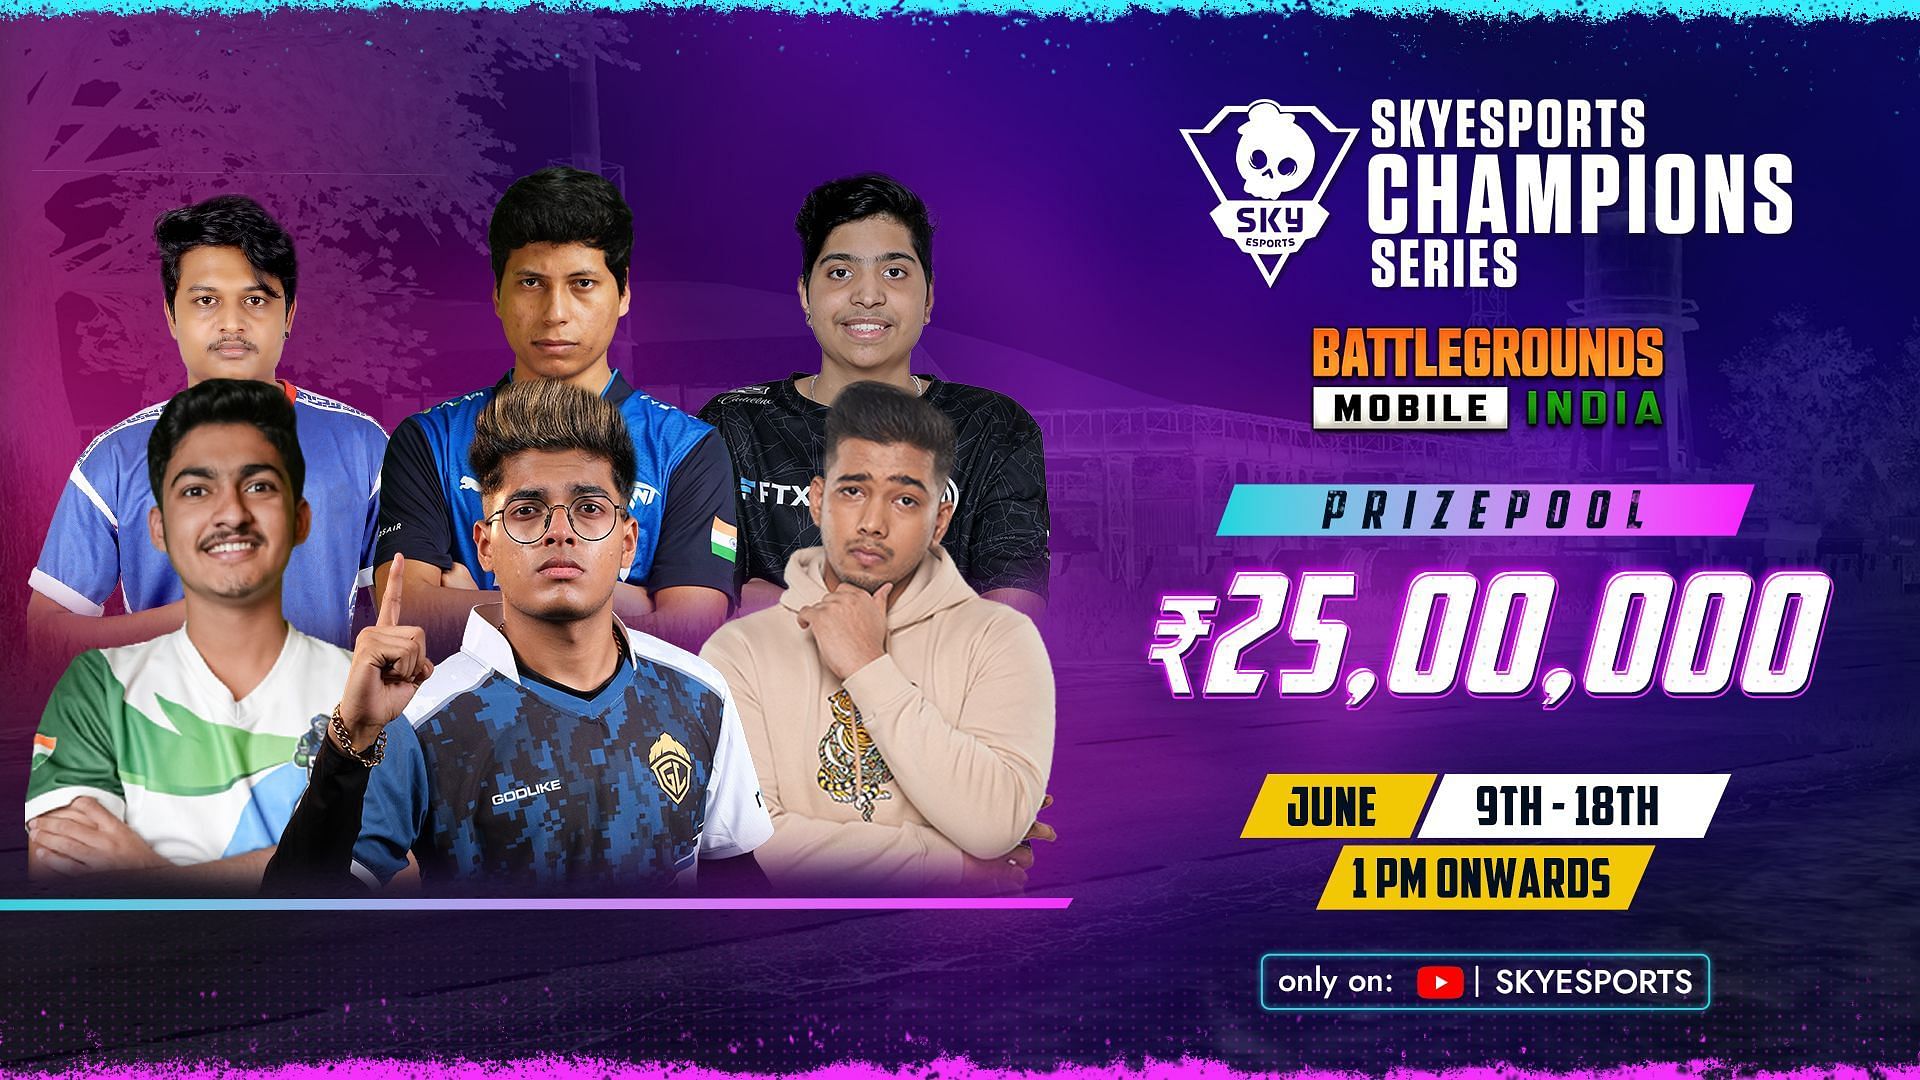 Skyesports Champions Series BGMI features a grand prize pool of ₹25 lakhs (Image via Skyesports)